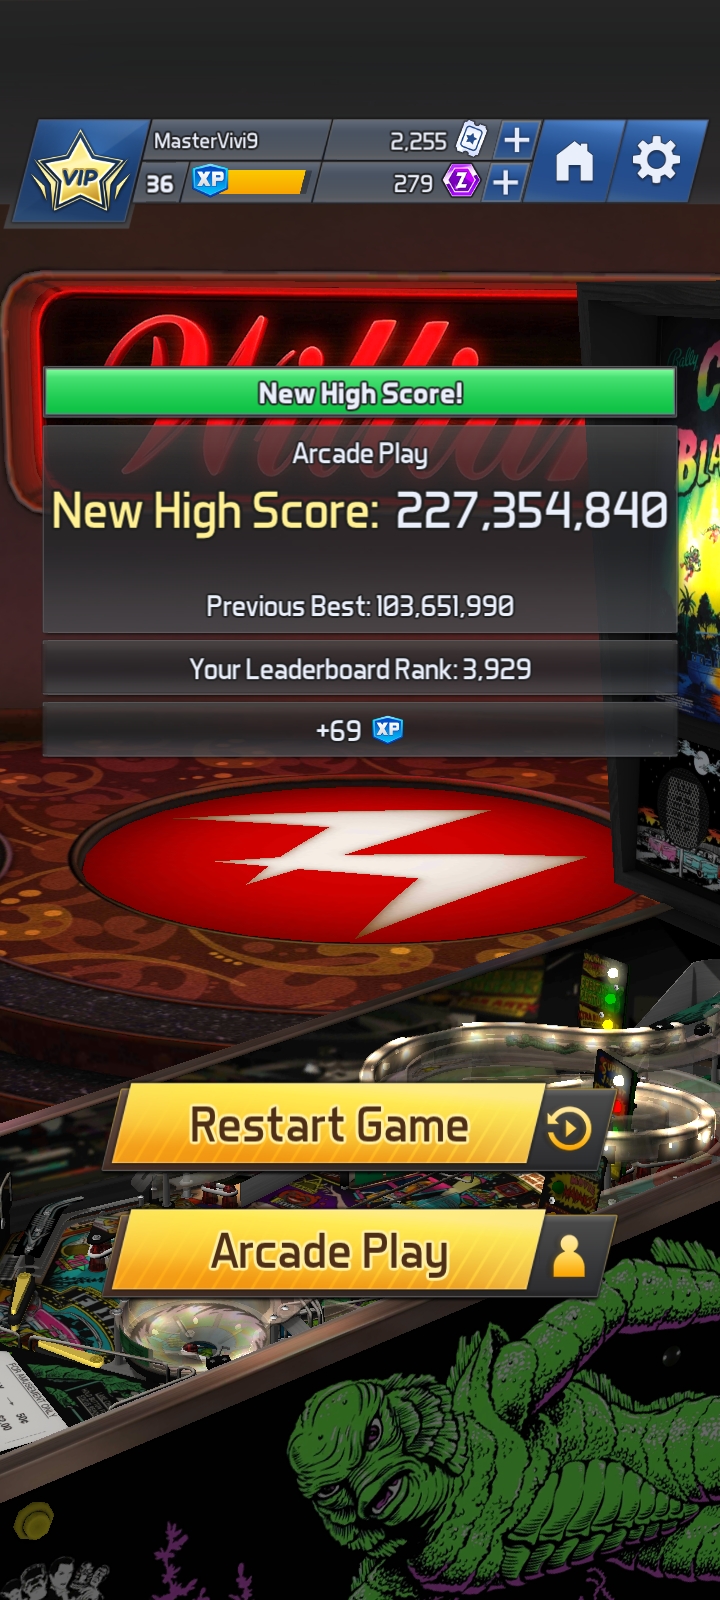 Hauntedprogram: Williams Pinball: Creature From The Black Lagoon [Arcade Play] (Android) 227,354,840 points on 2022-10-22 18:24:18